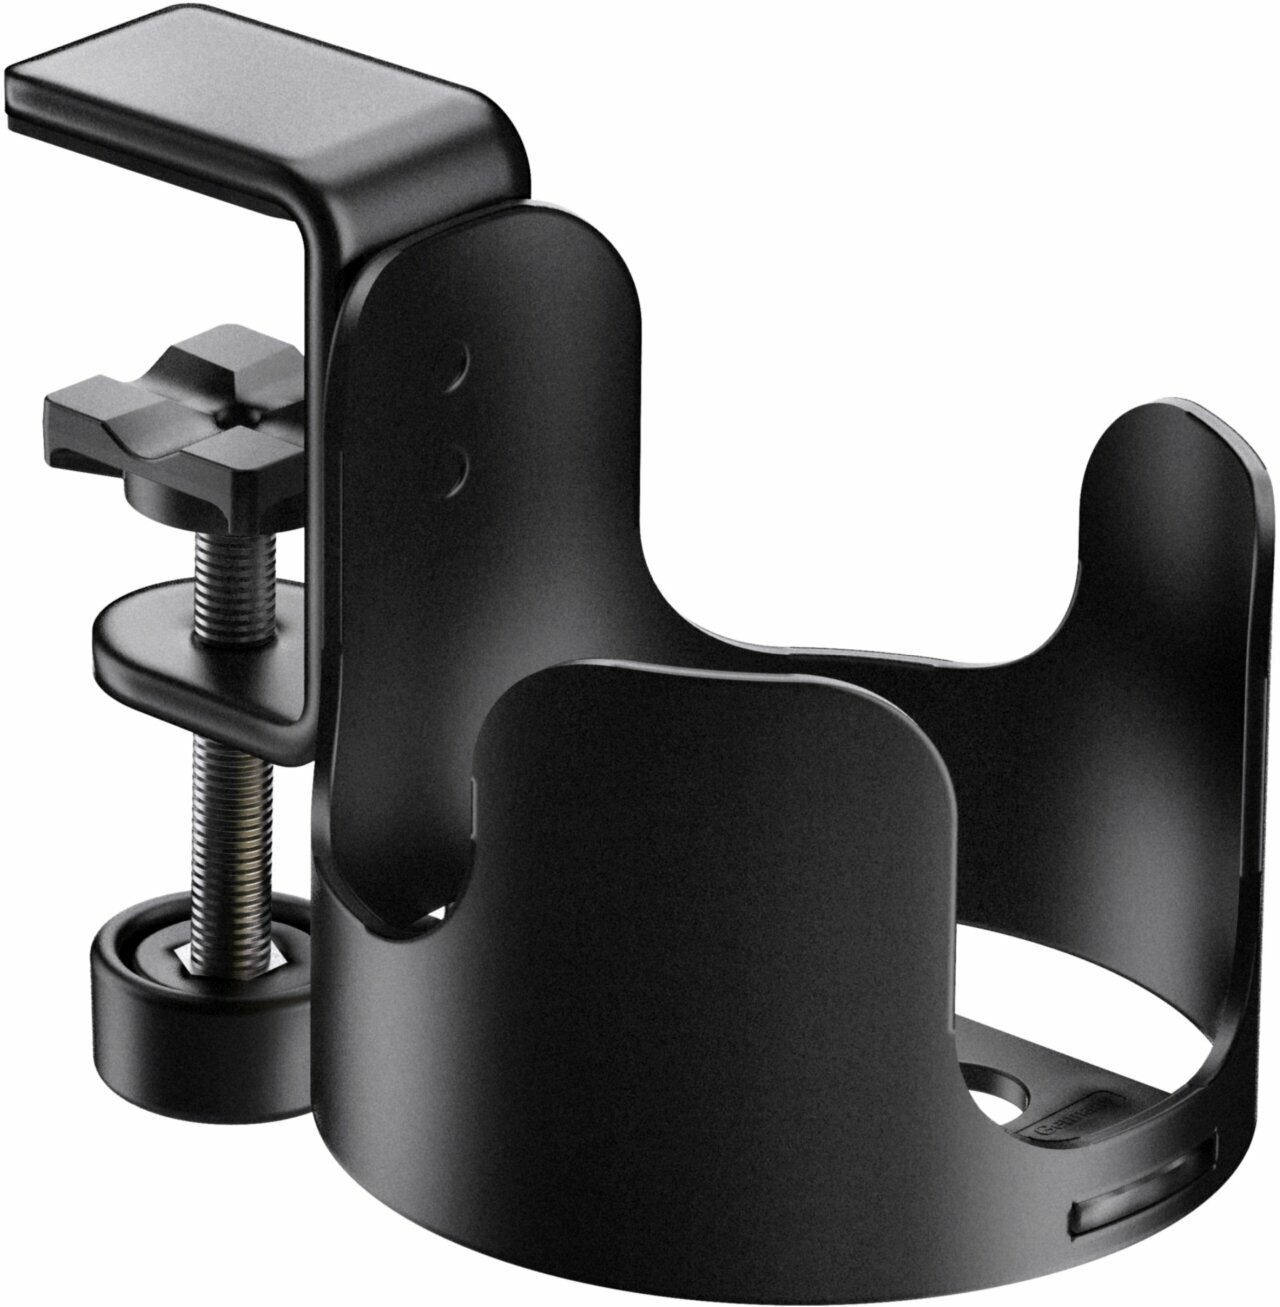 Konig & Meyer 16019 Accessory for microphone stand